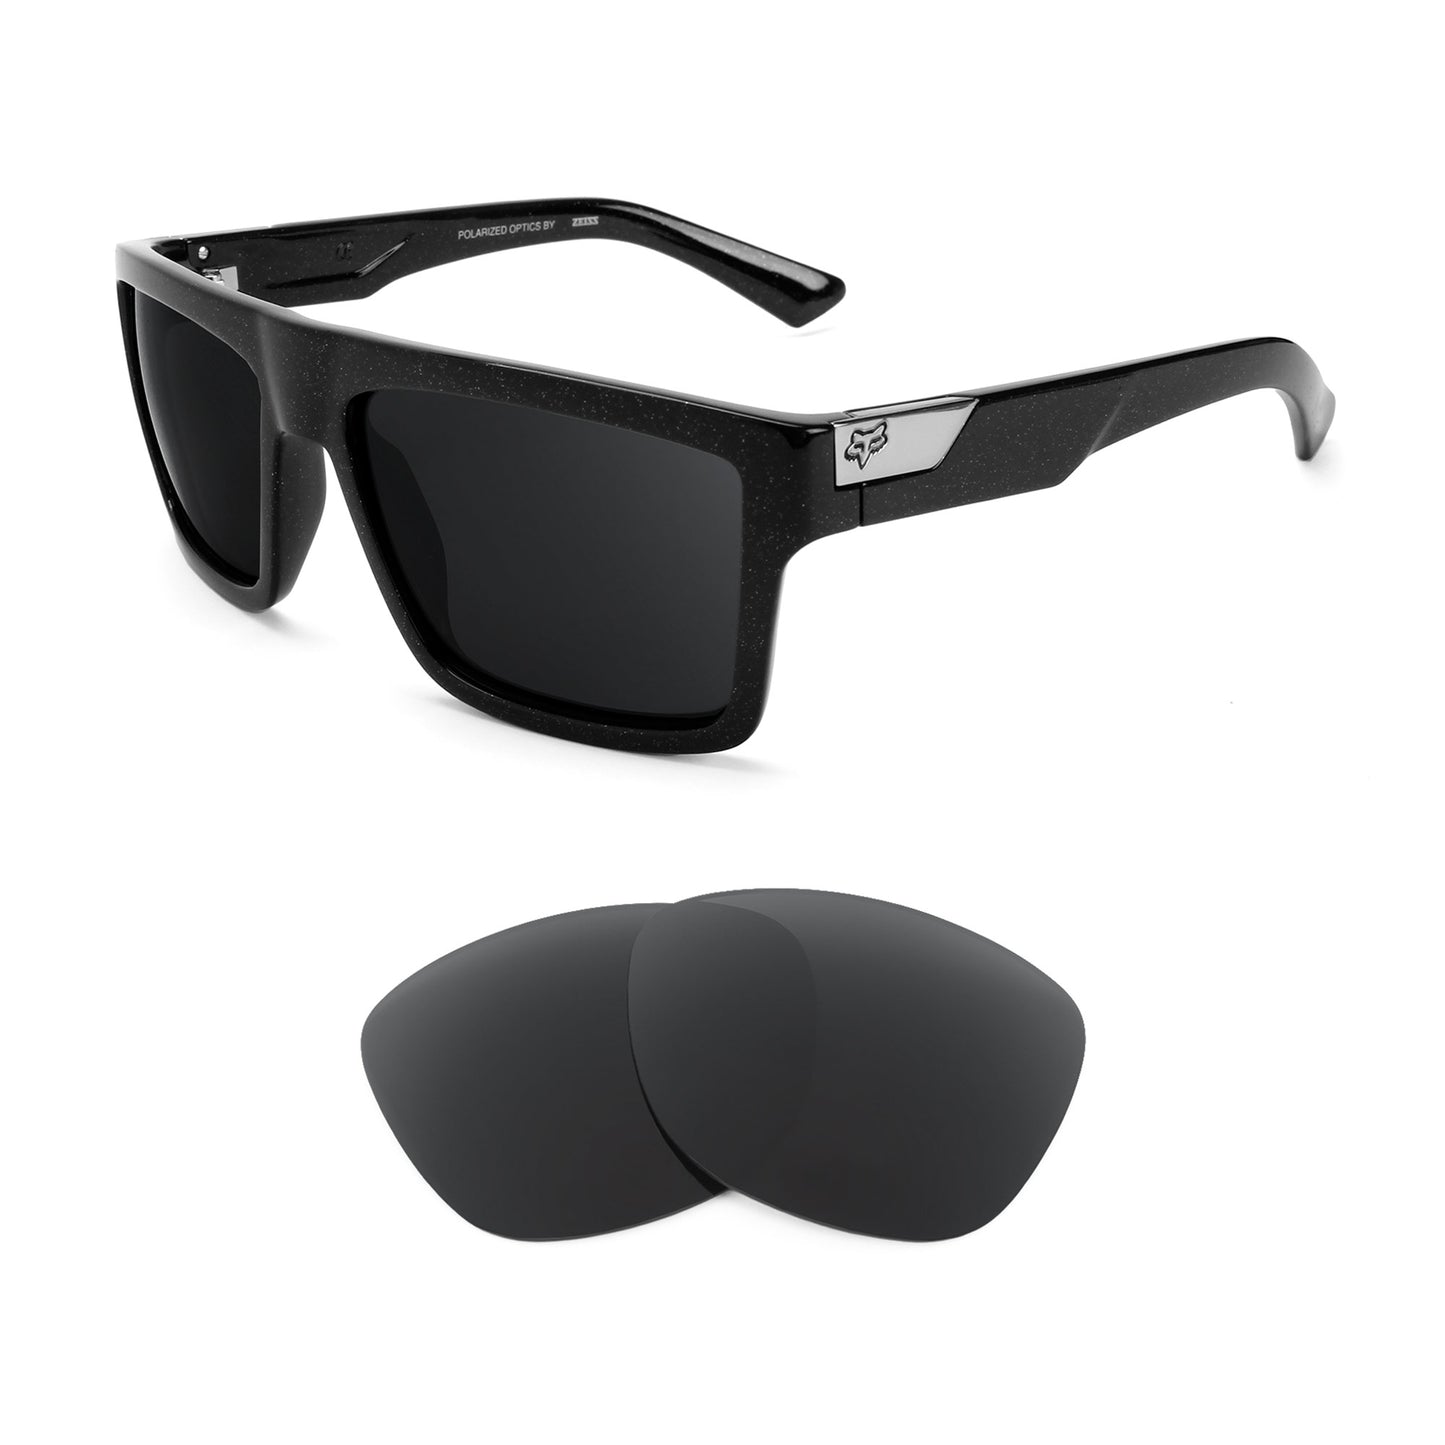 Fox Racing The Director sunglasses with replacement lenses